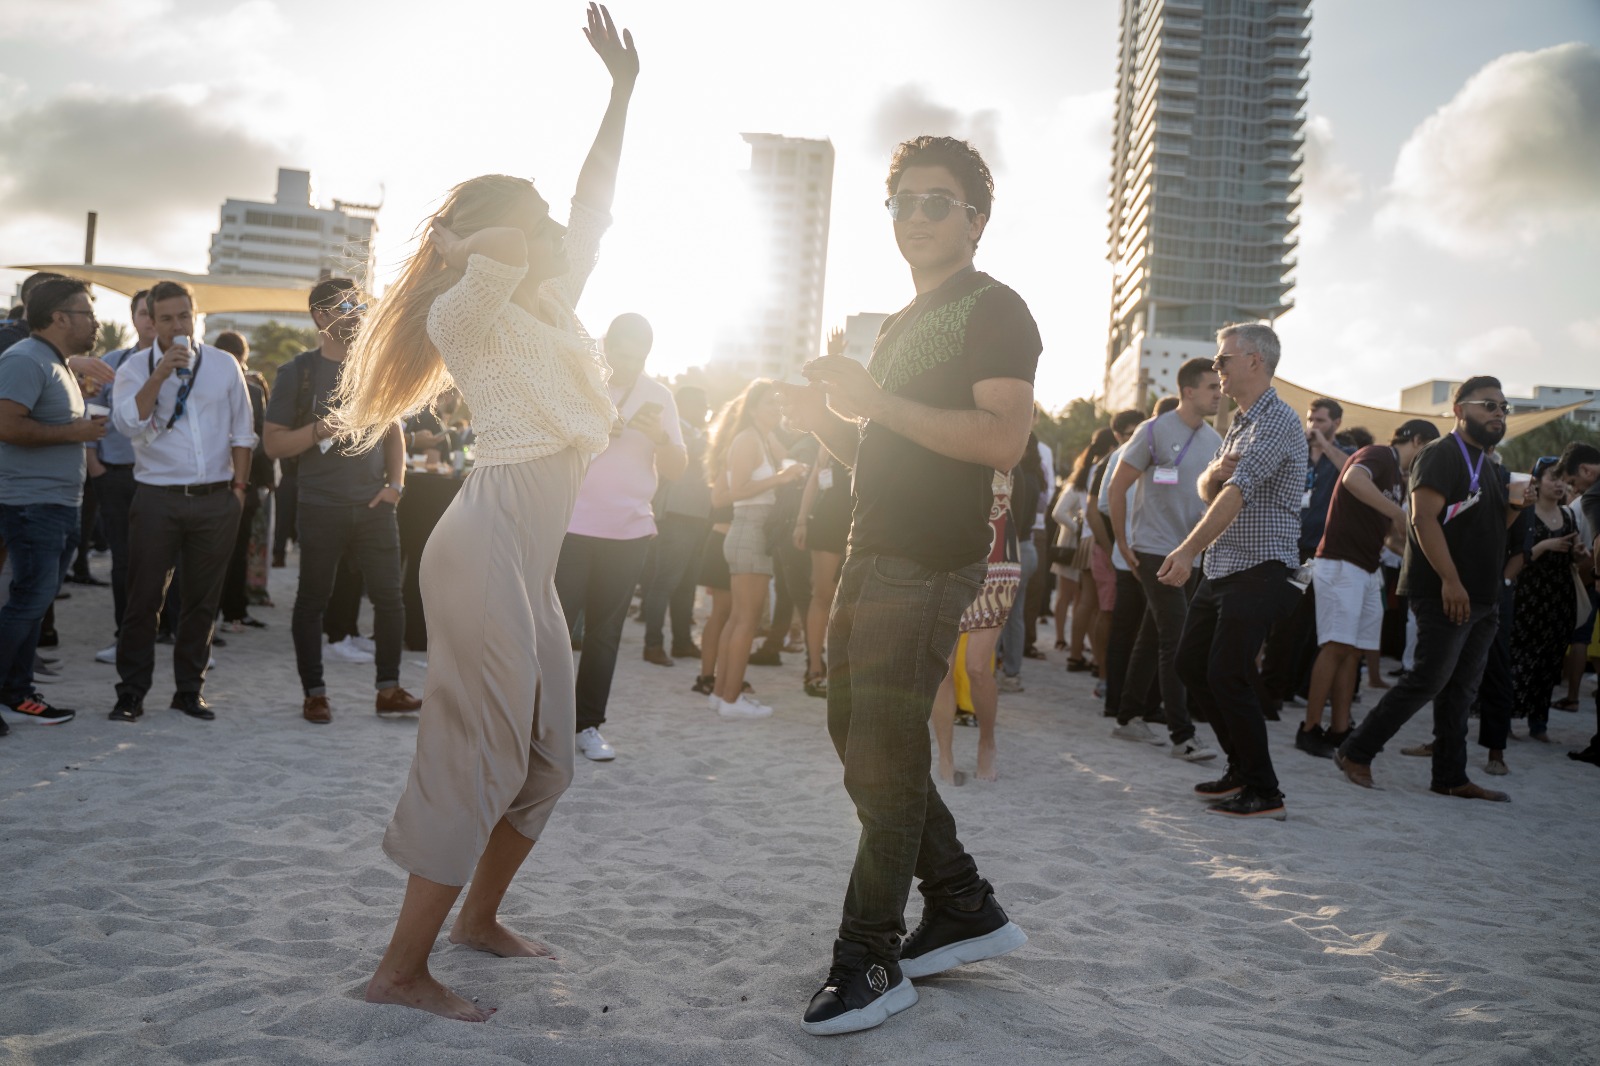 Image of a group of people dancing on the beach